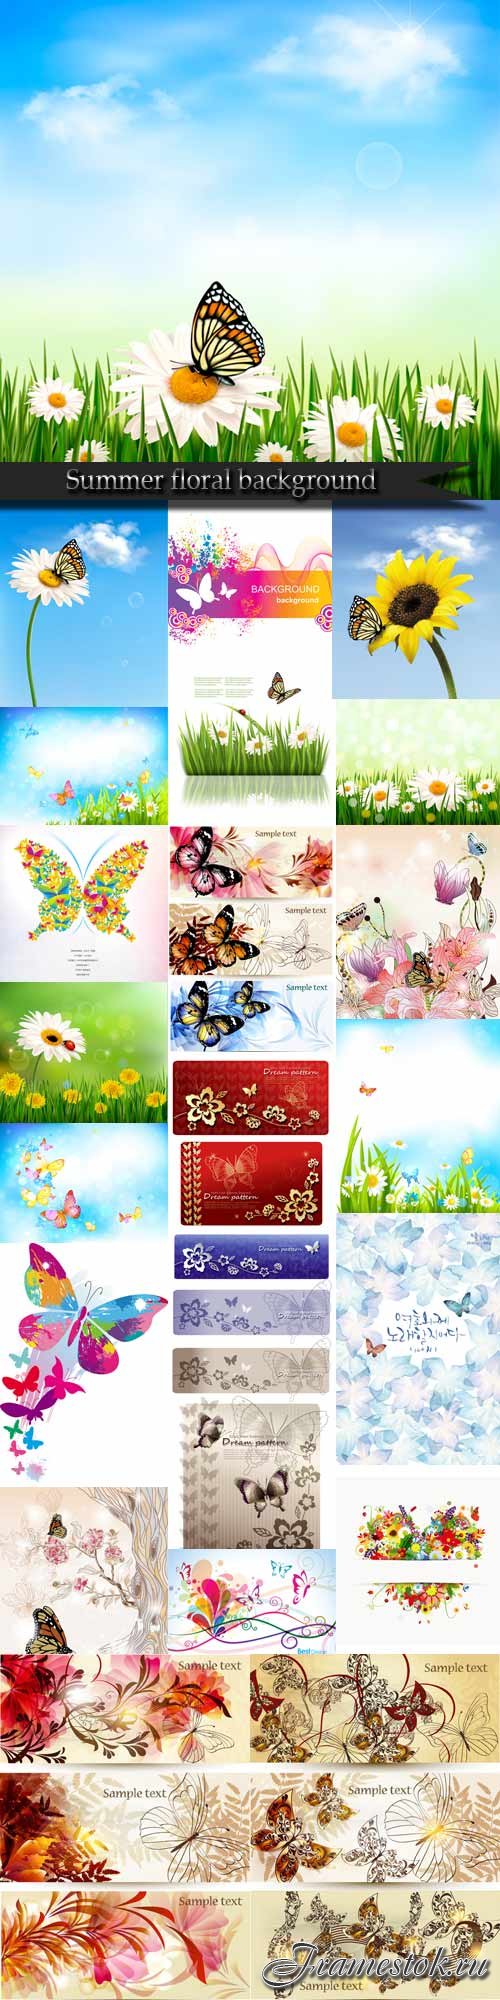 Summer floral background with butterflies